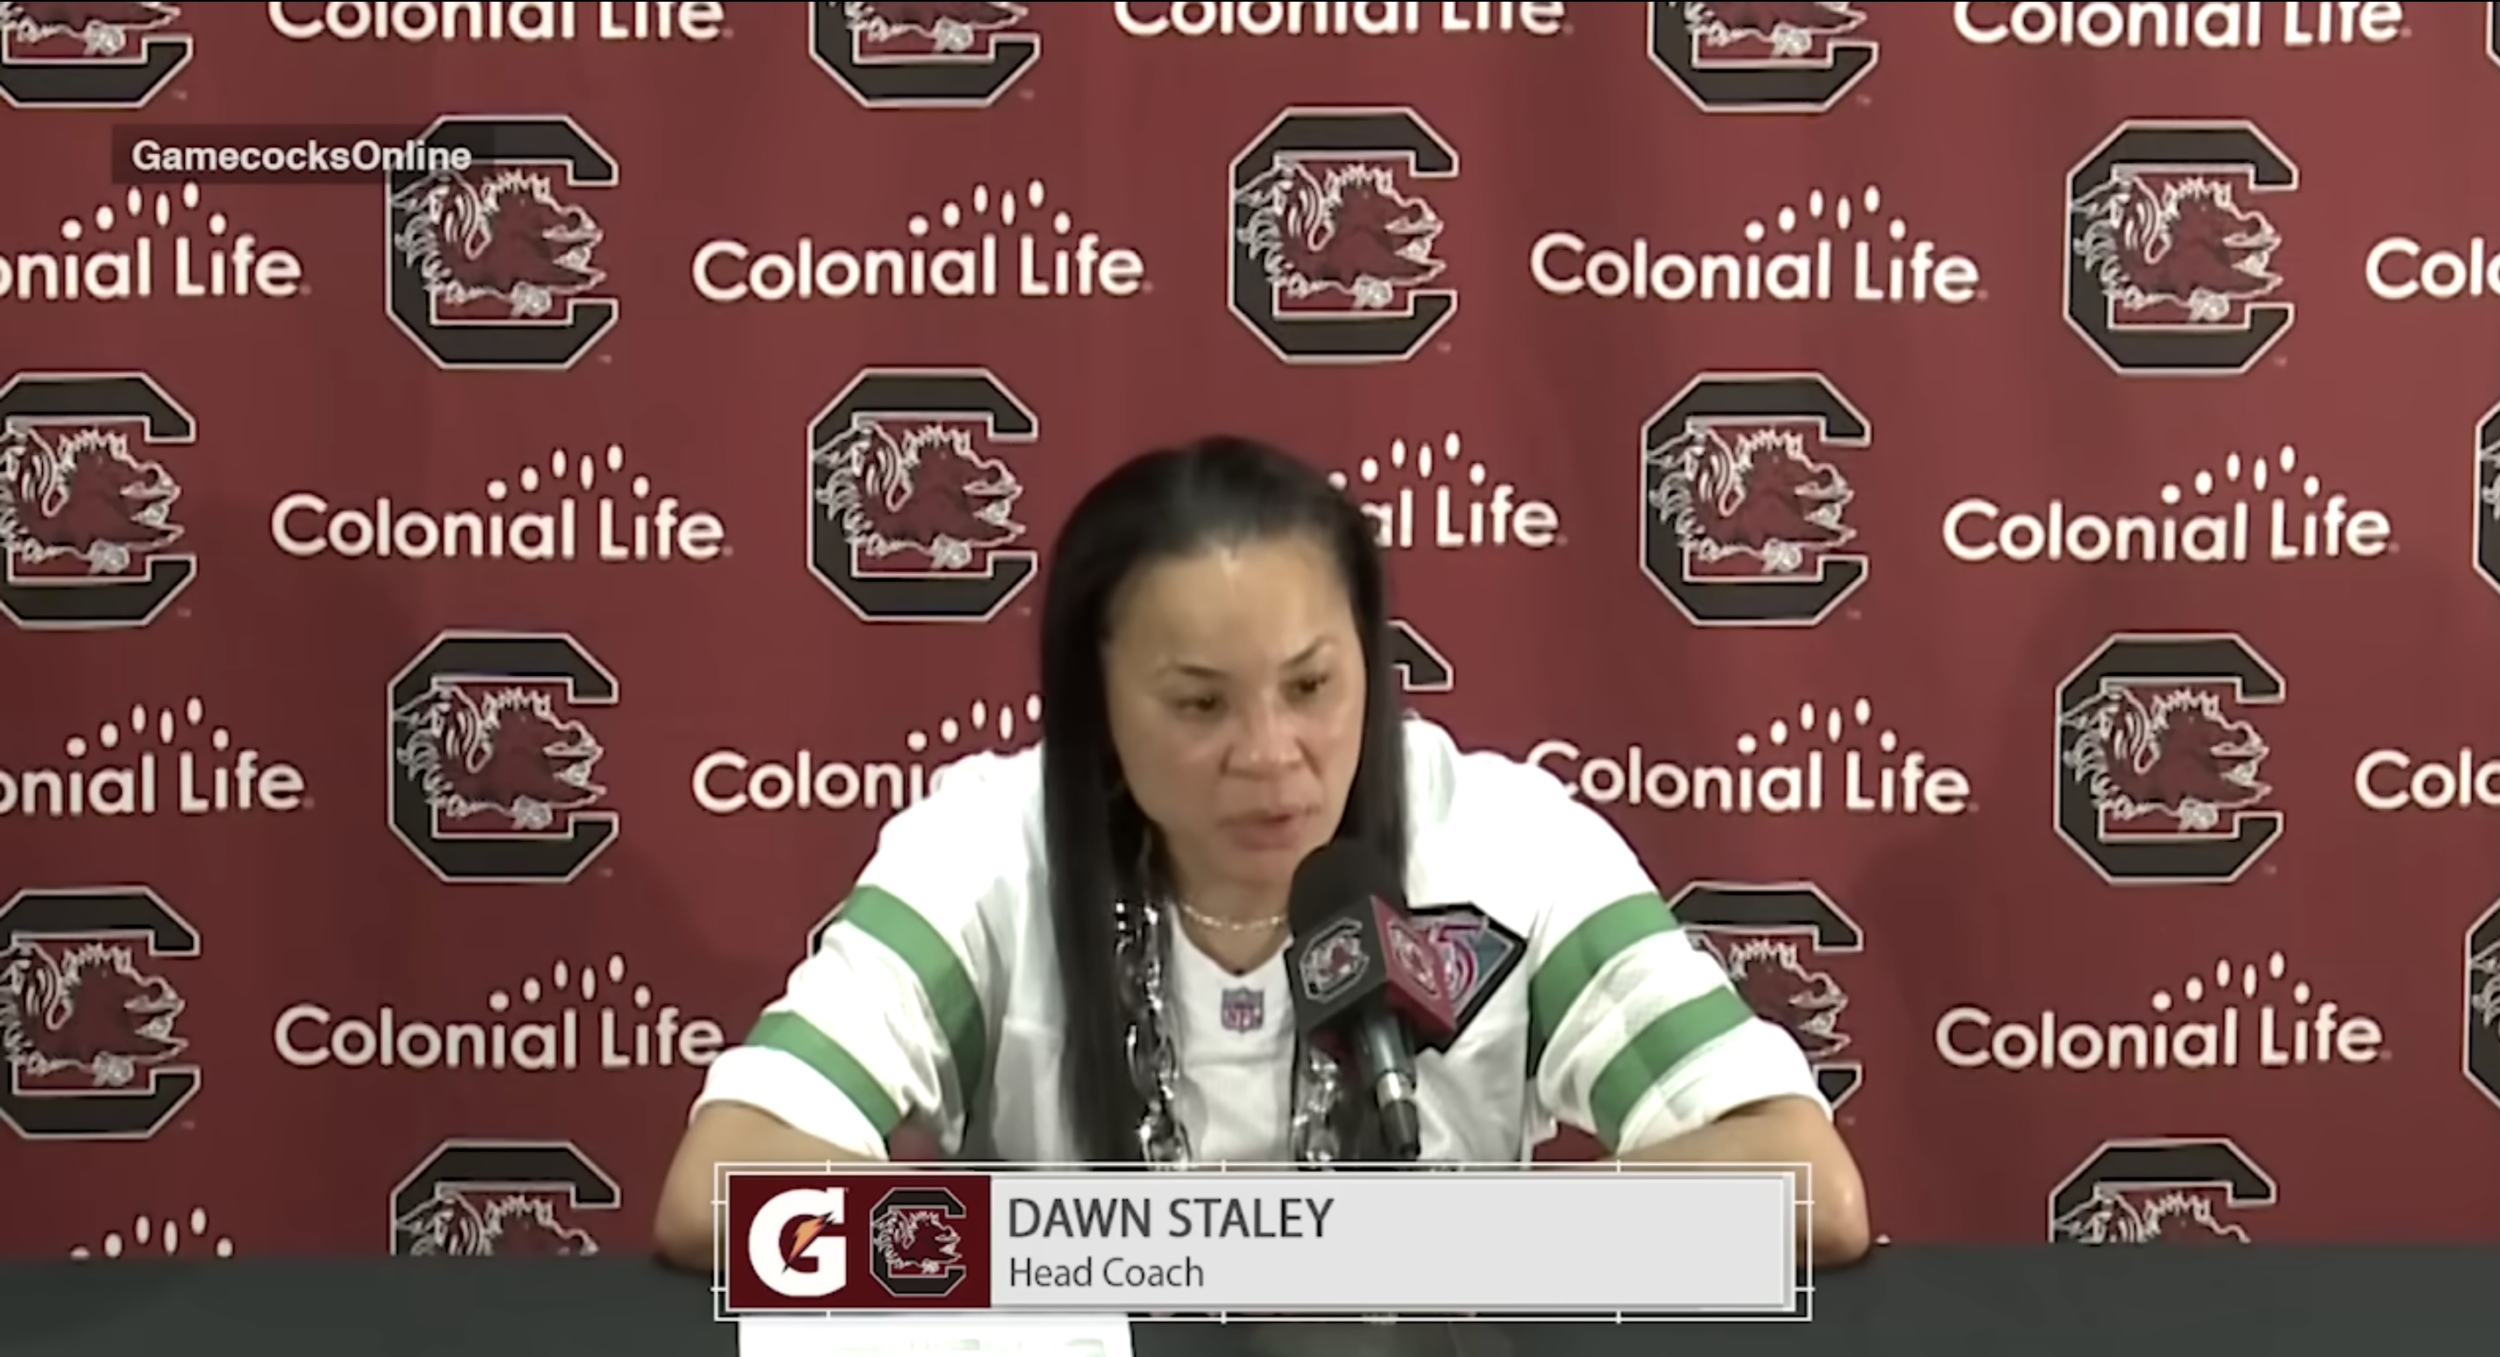 PostGame News Conference: (LSU) - Dawn Staley